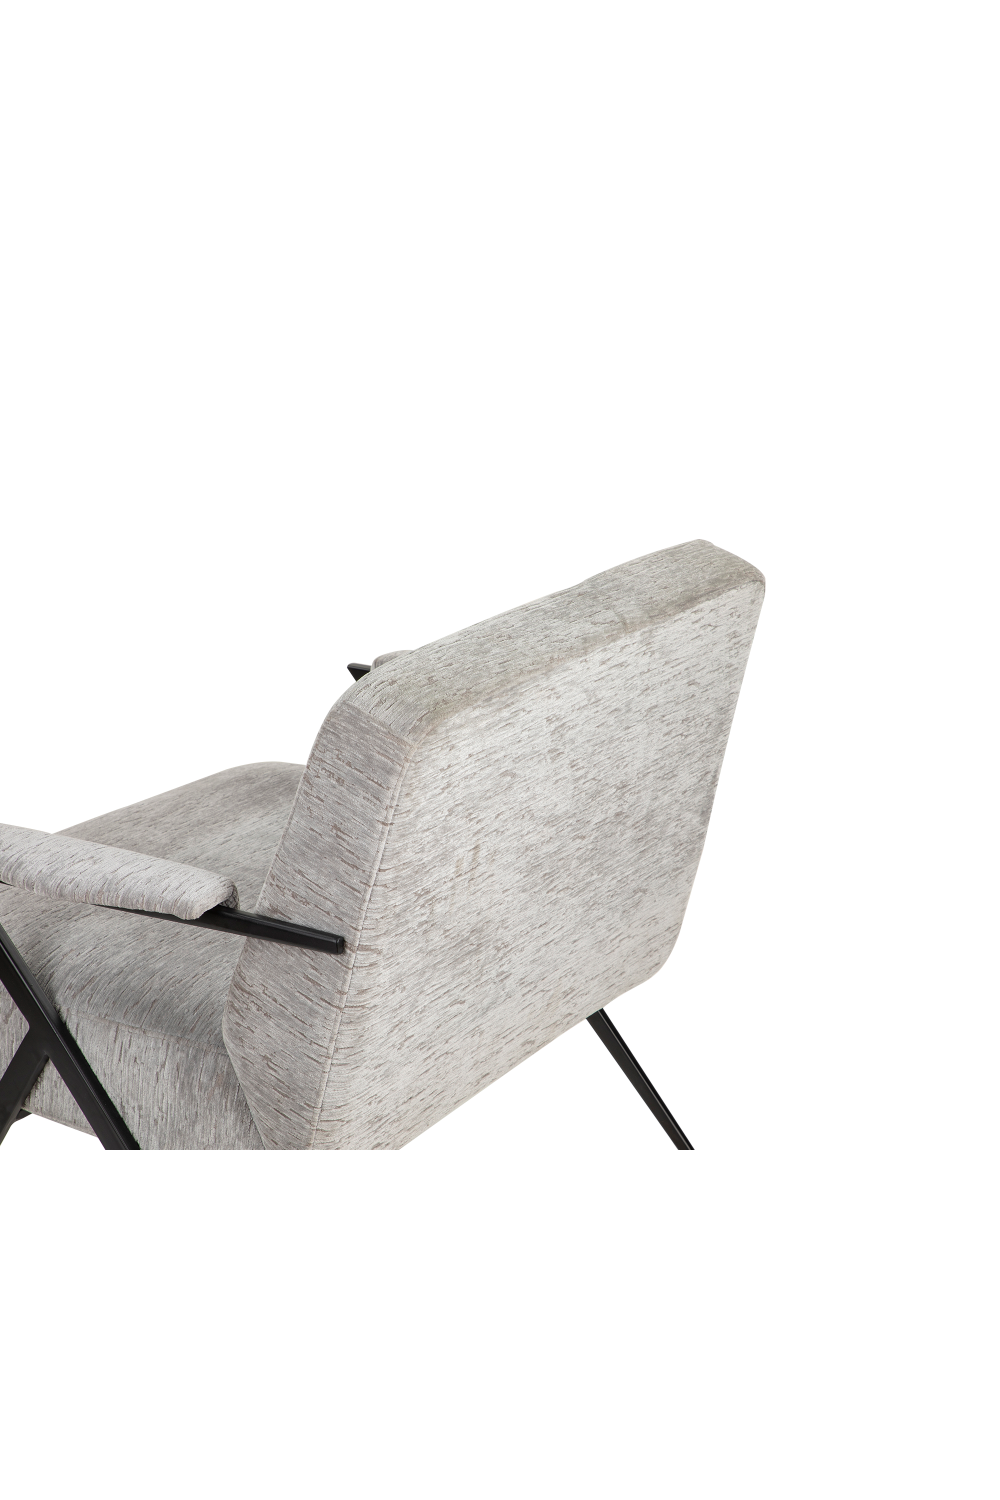 Vintage Silver Tailored Occasional Chair | Liang & Eimil Ponti | OROA.com